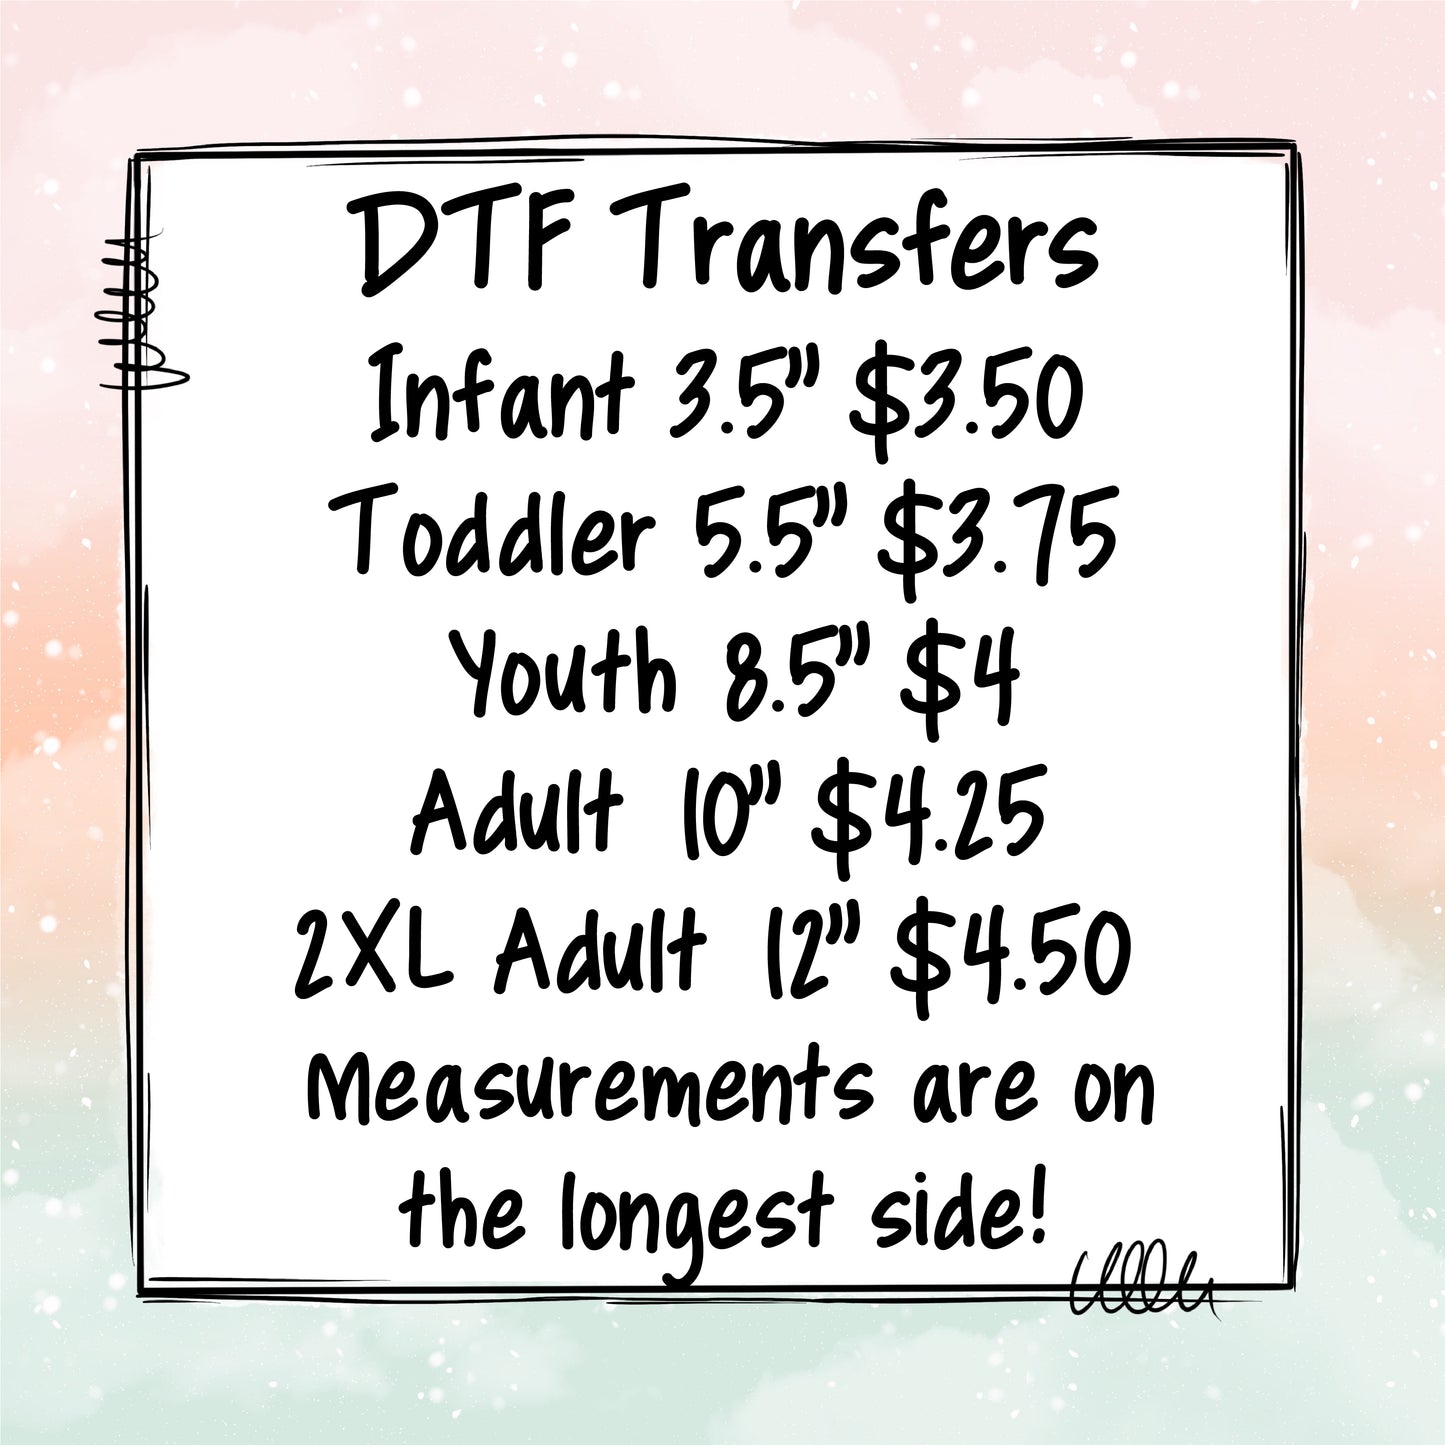 DTF ENTER YOUR OWN - See Google Drive - DTF Transfer Set/Ready To Press Direct to Film Transfer